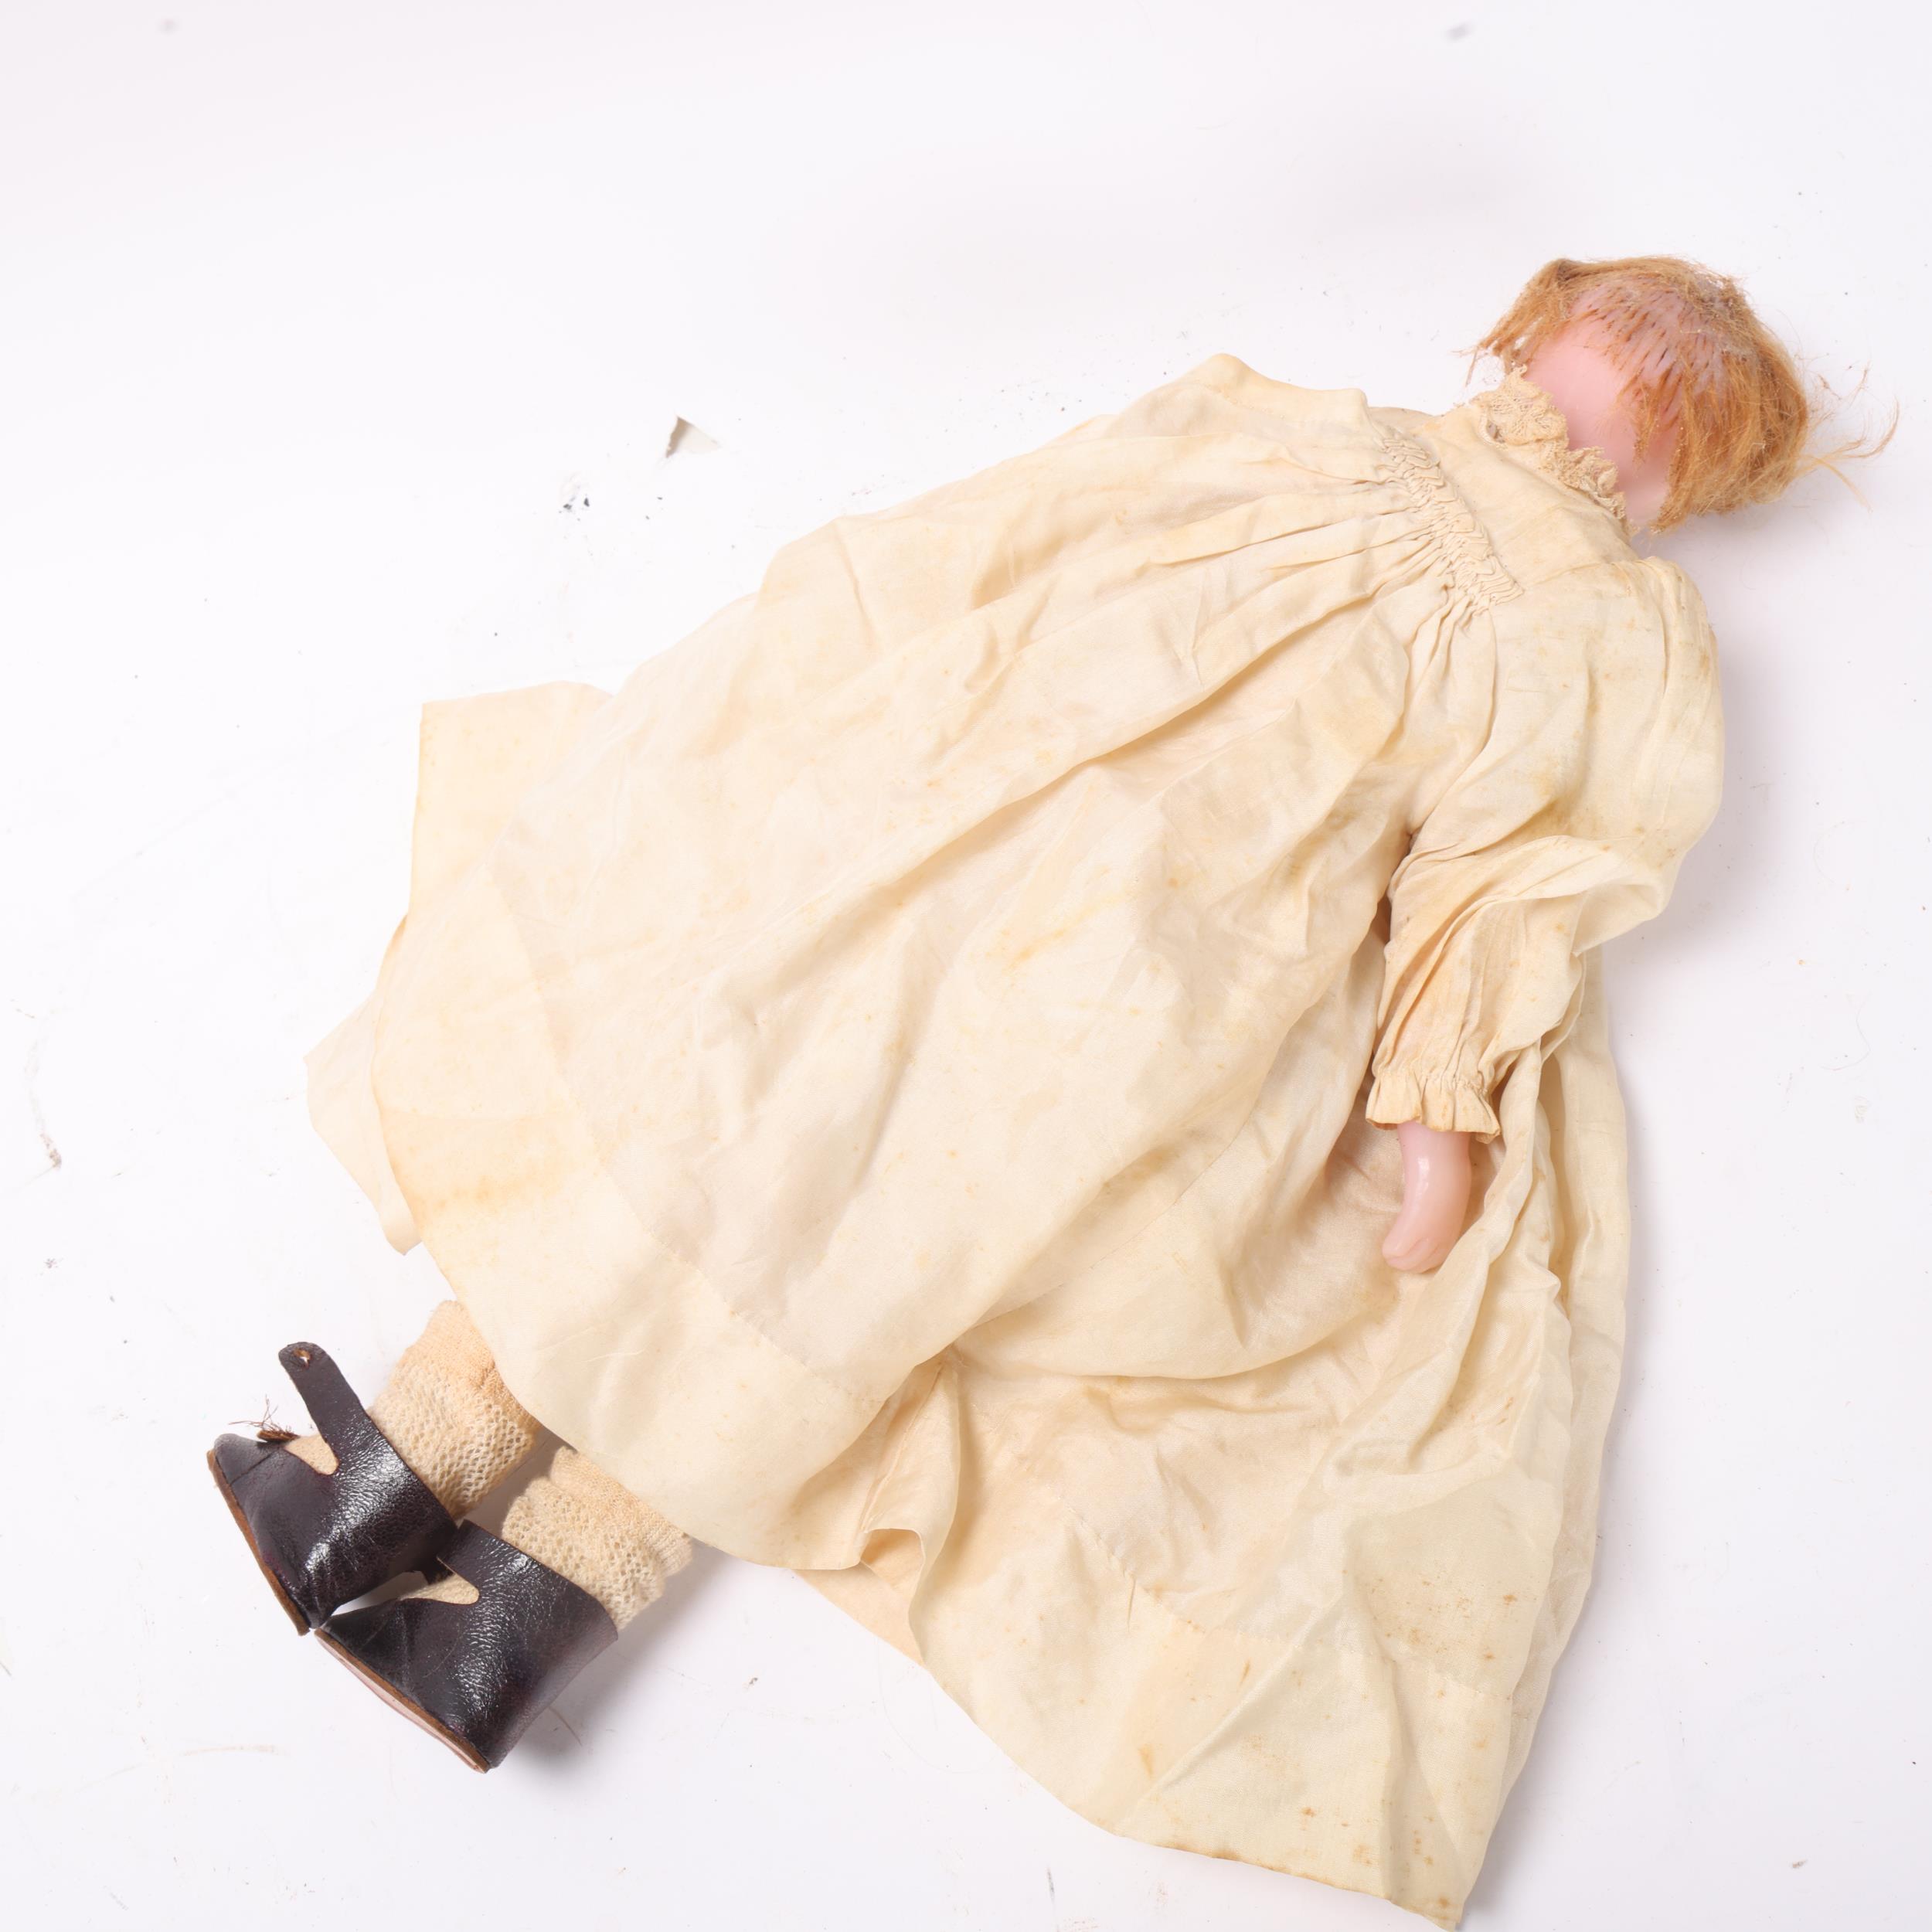 Victorian wax doll with wax limbs and original clothes, length 39cm - Image 3 of 3